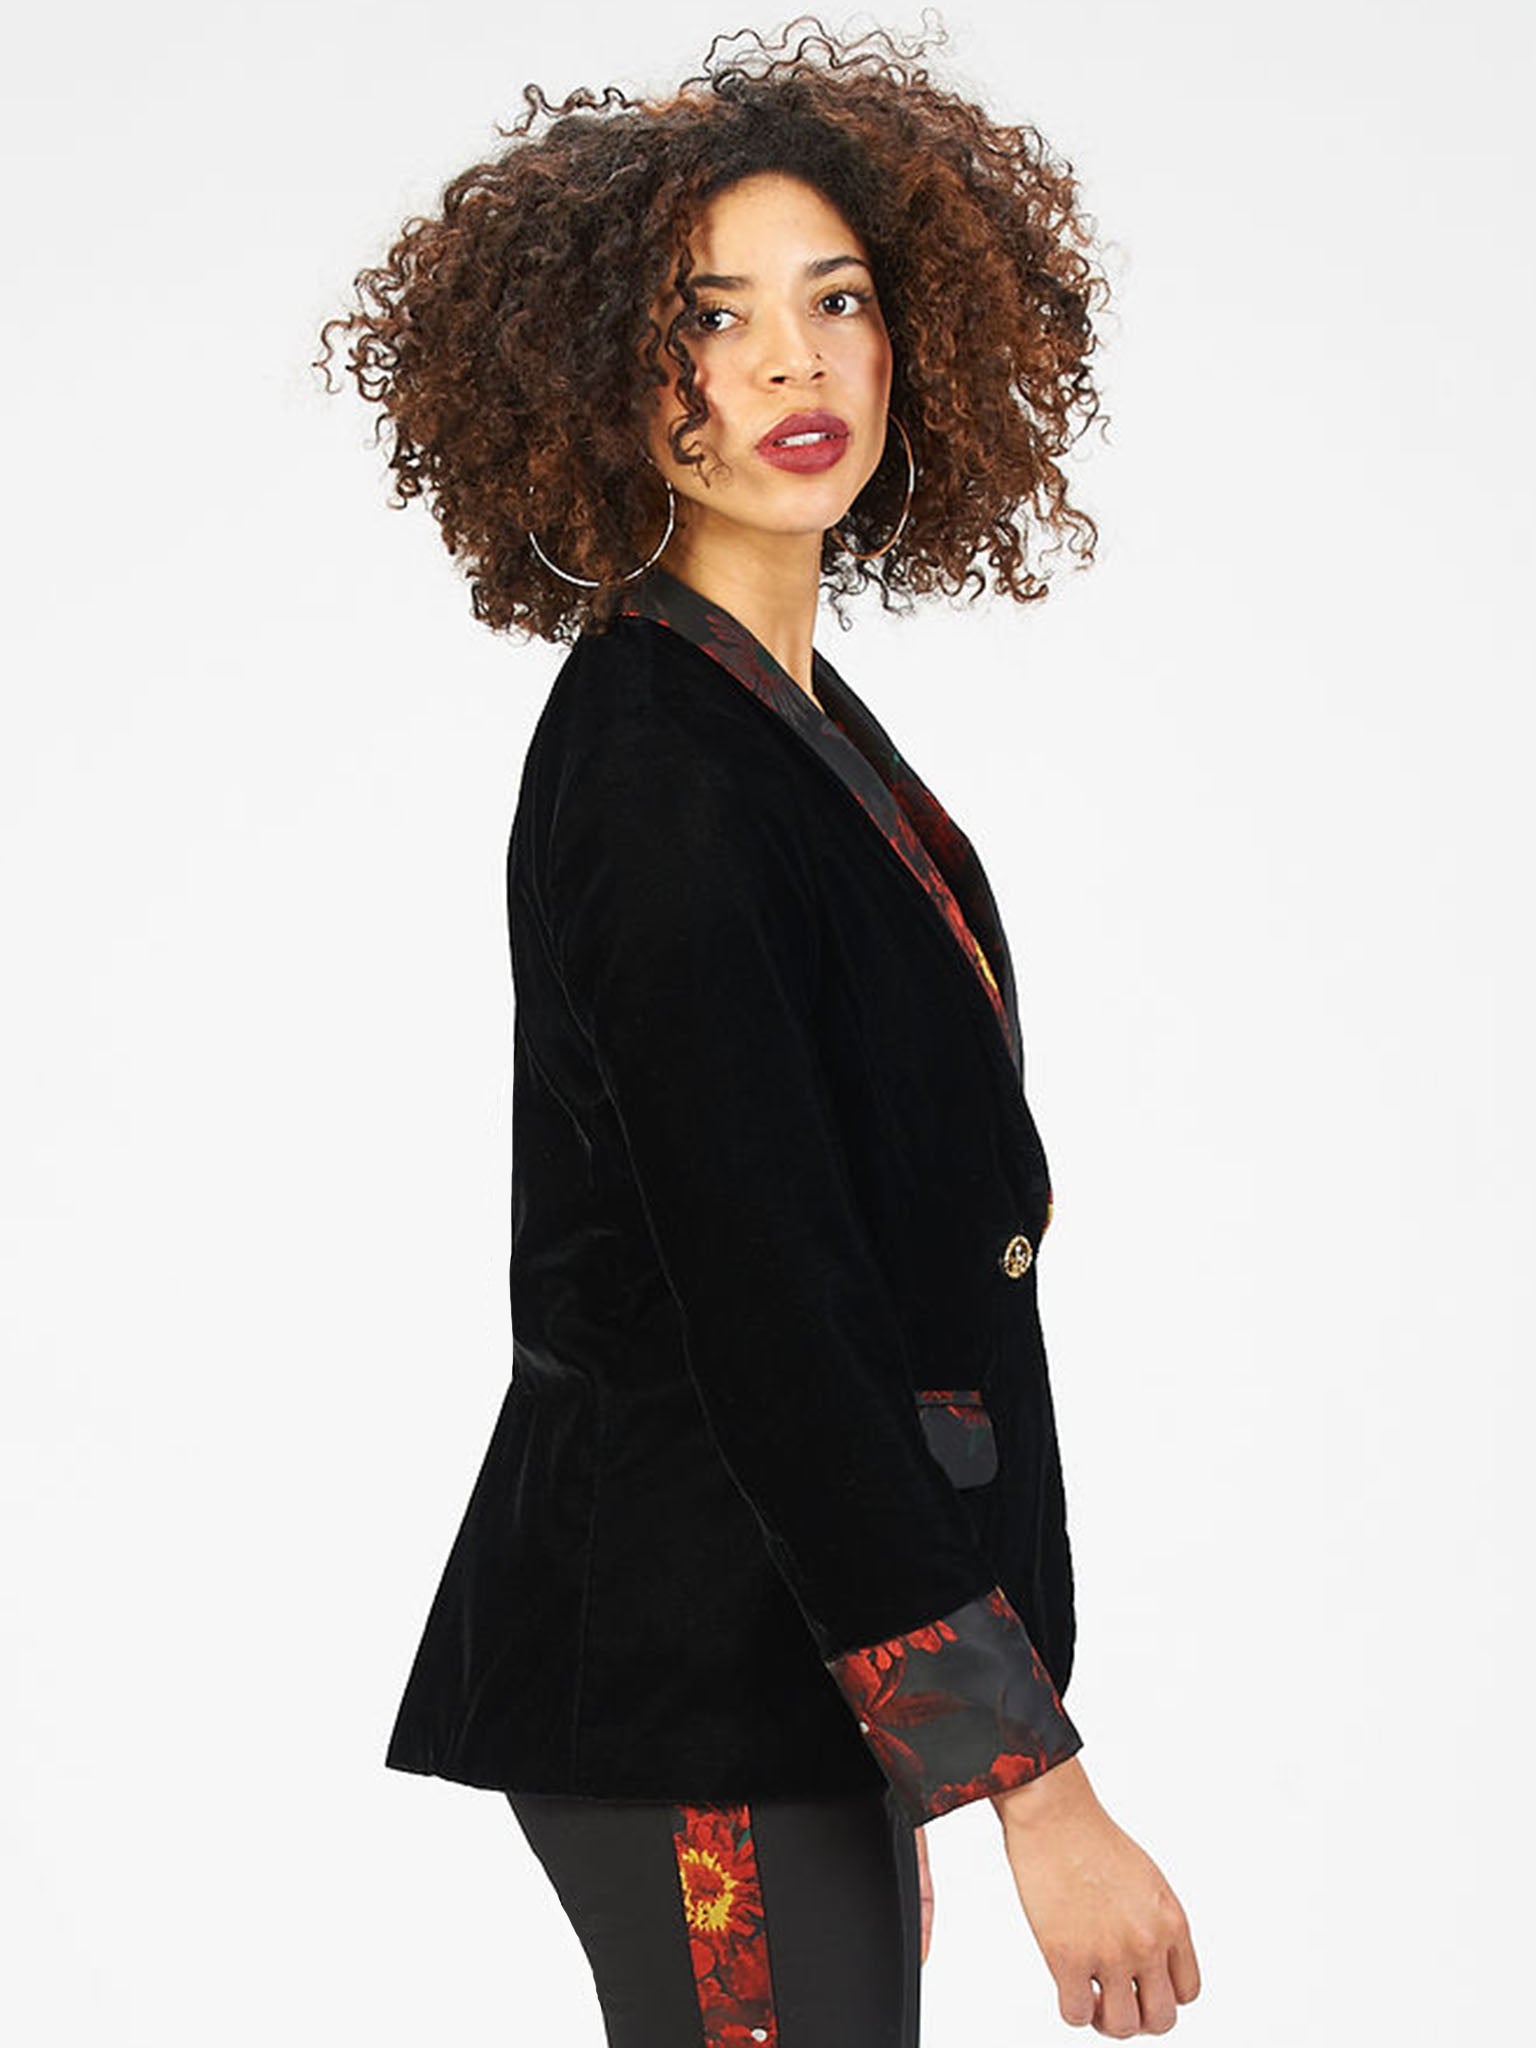 Cotton Velvet Blazer in Black with Red Floral Lapels and Gold